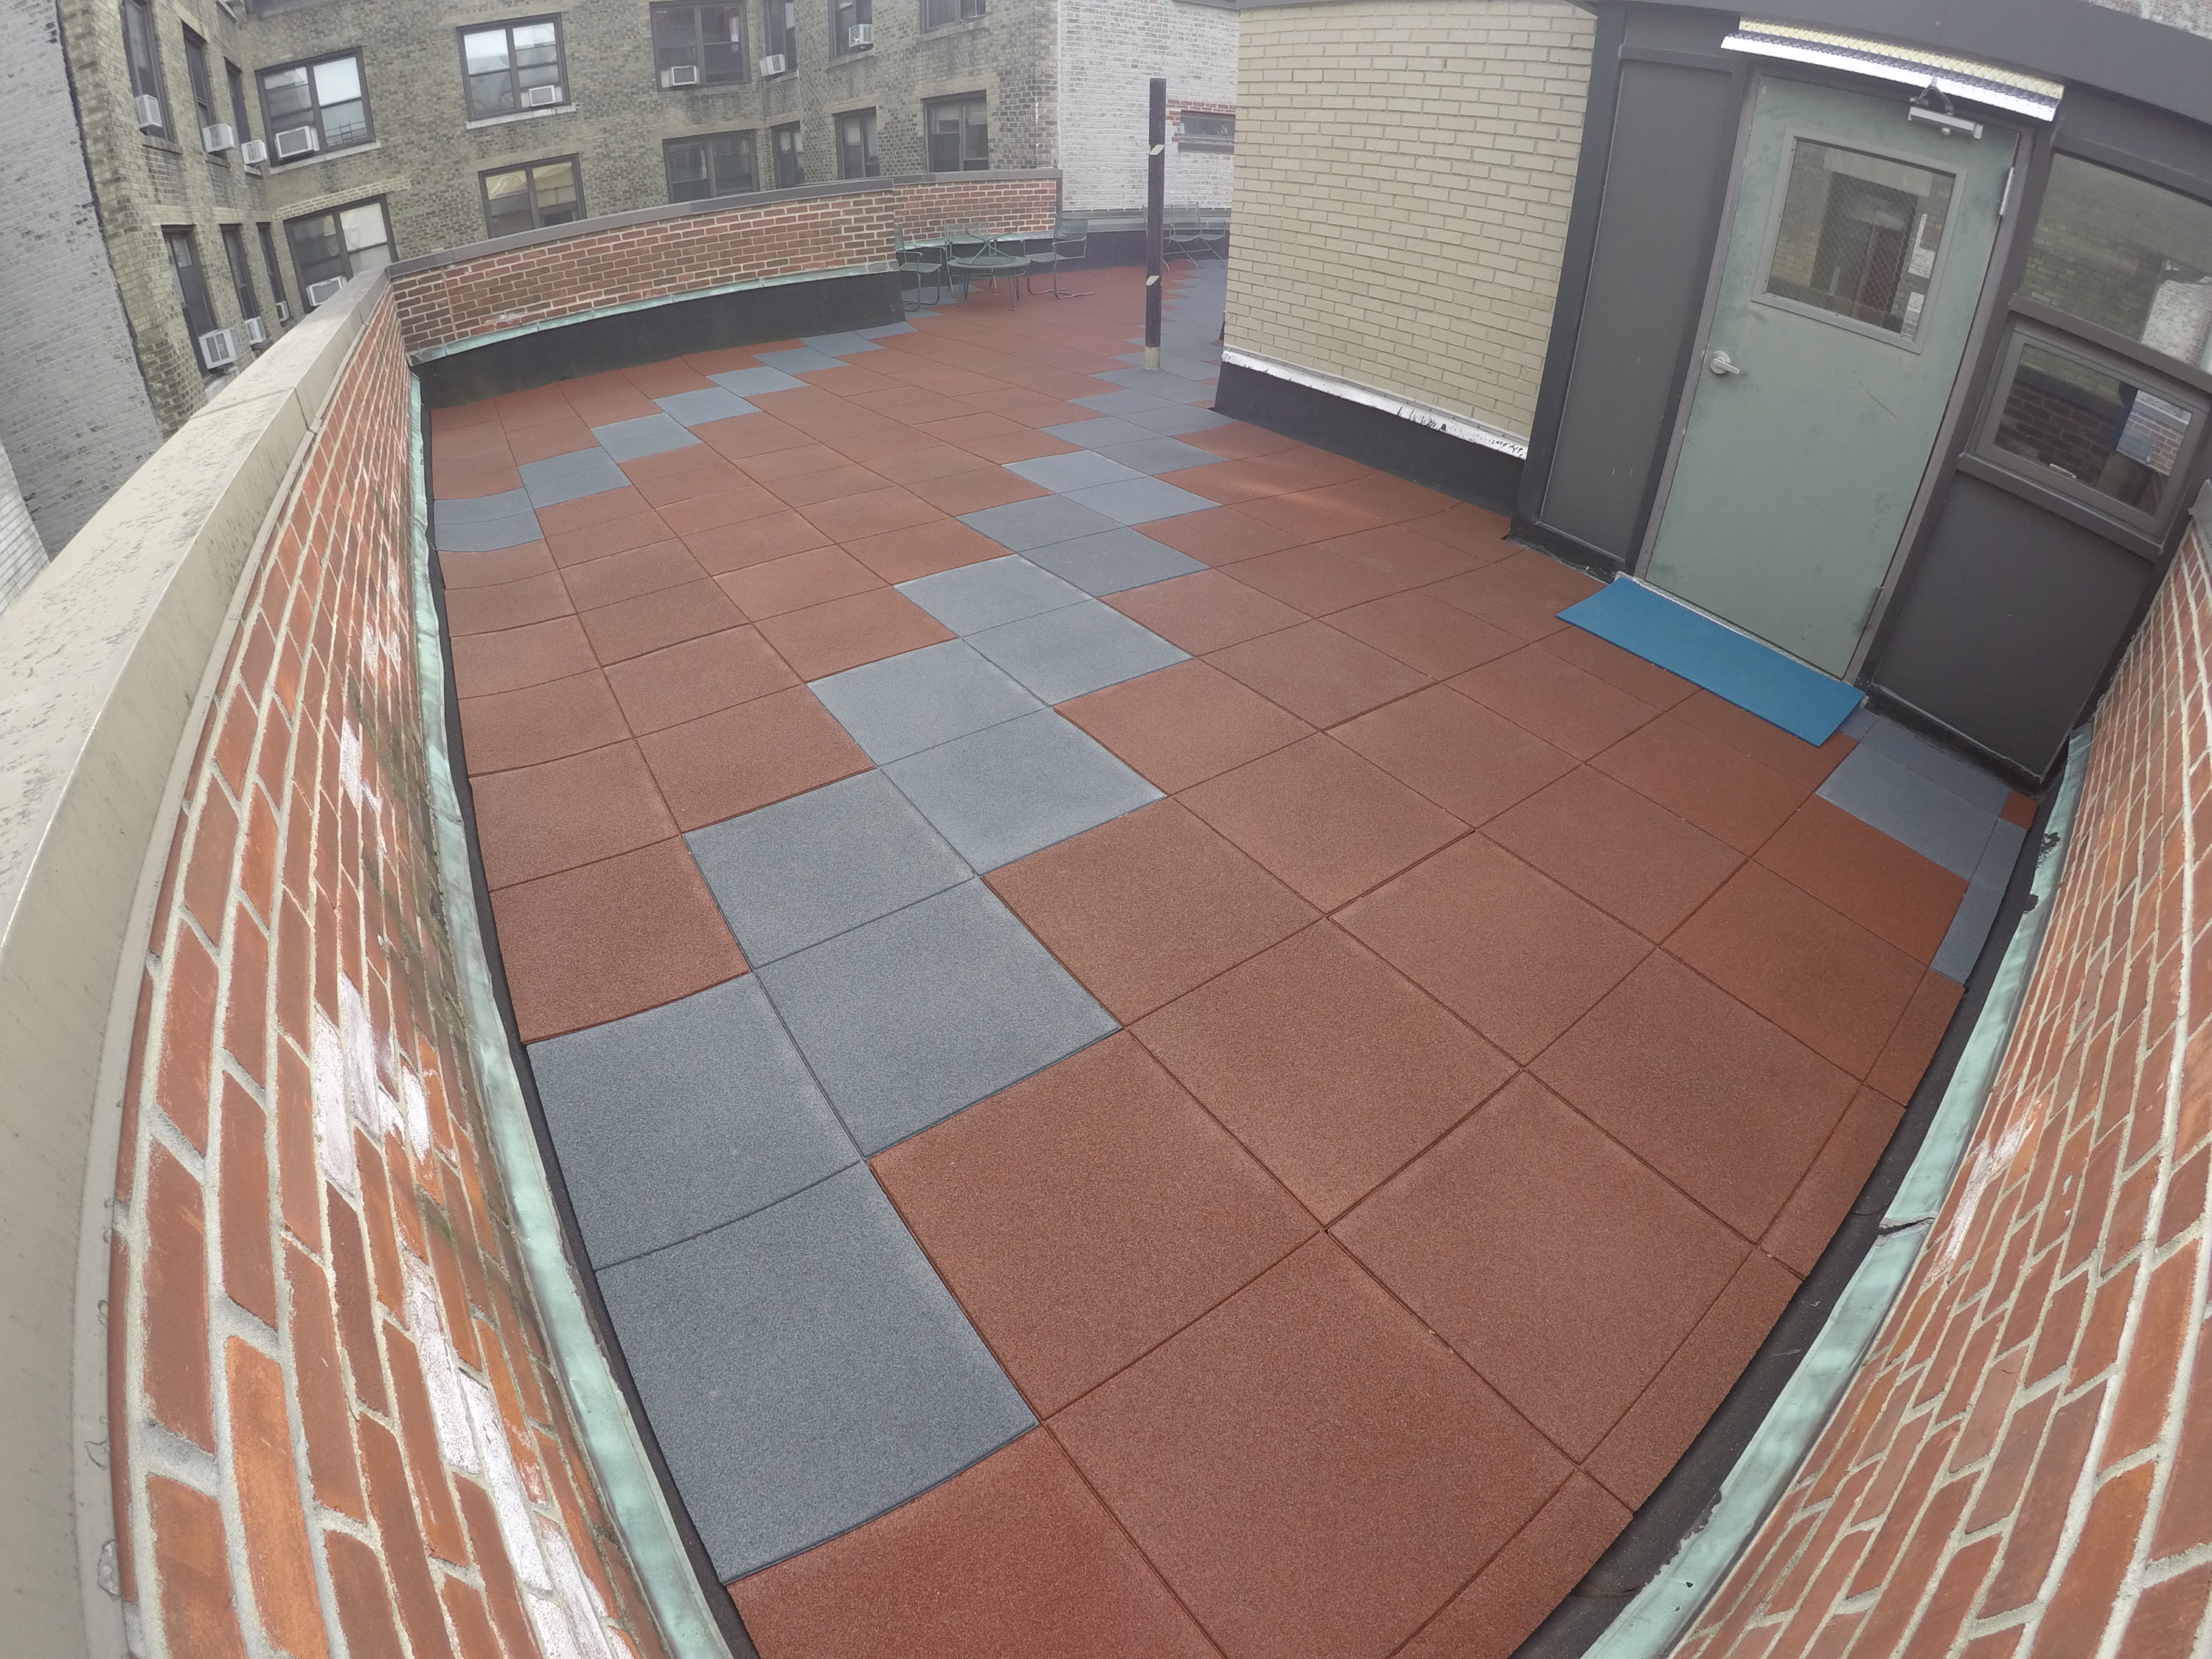 Rooftop play patio area using multiple pigmented colors